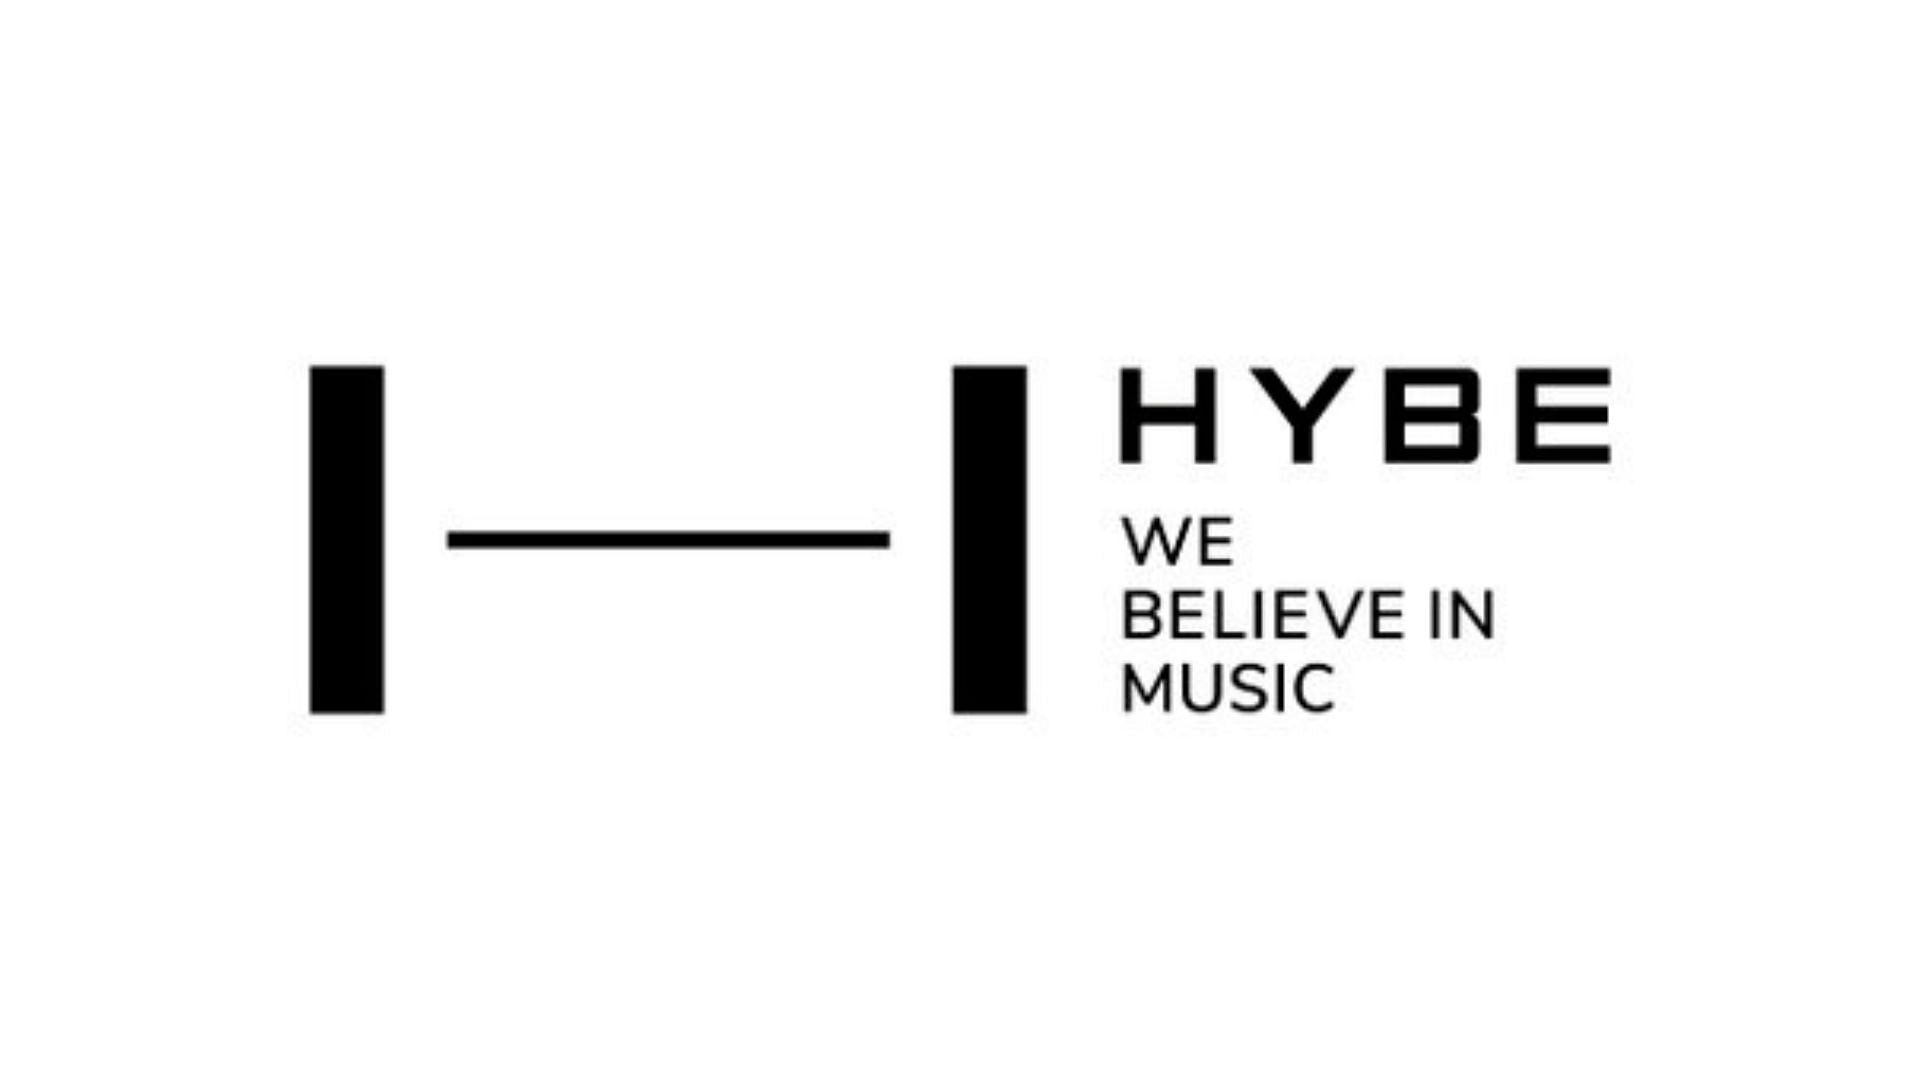 HYBE mass production strategy receives backlash from fans (image via hybecorp.com)